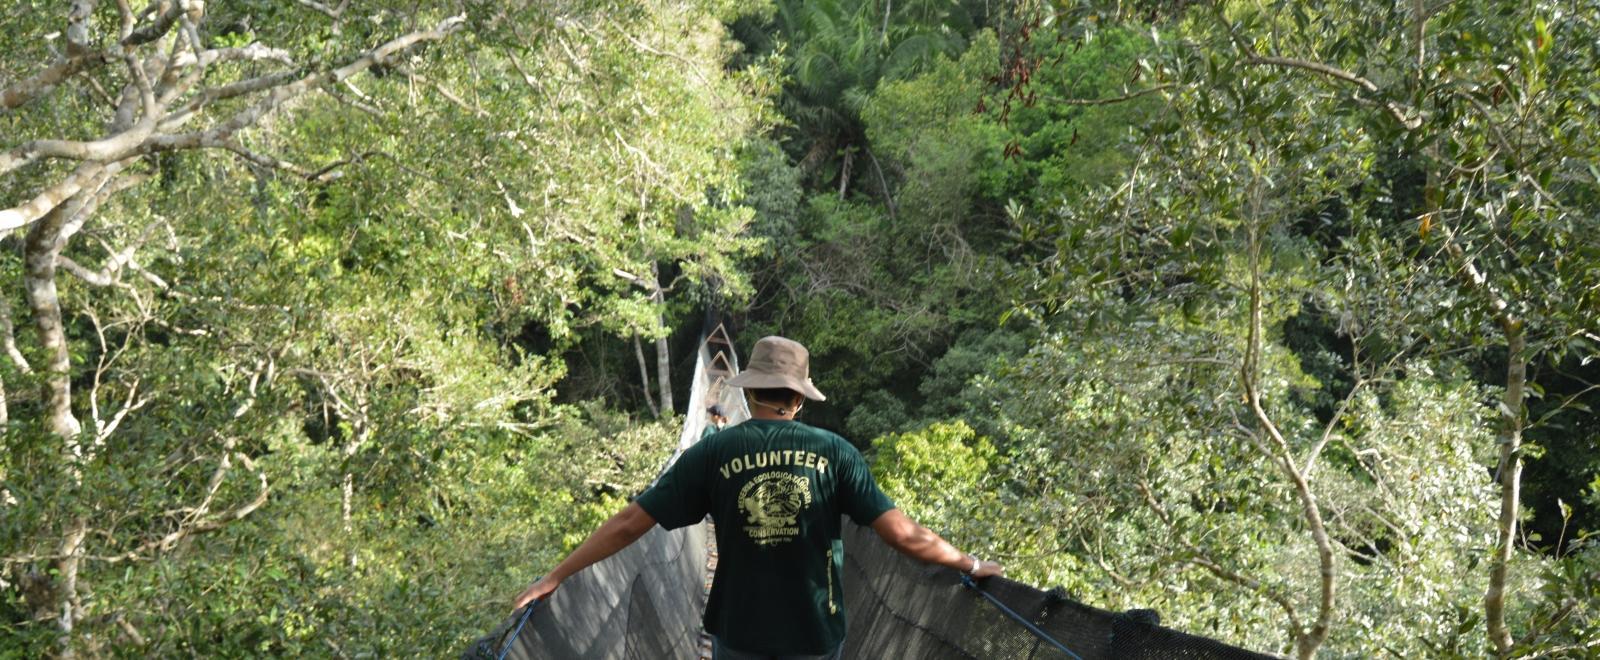 Projects Abroad volunteers experiences the Amazon from the highest treetop canopy in South America. 